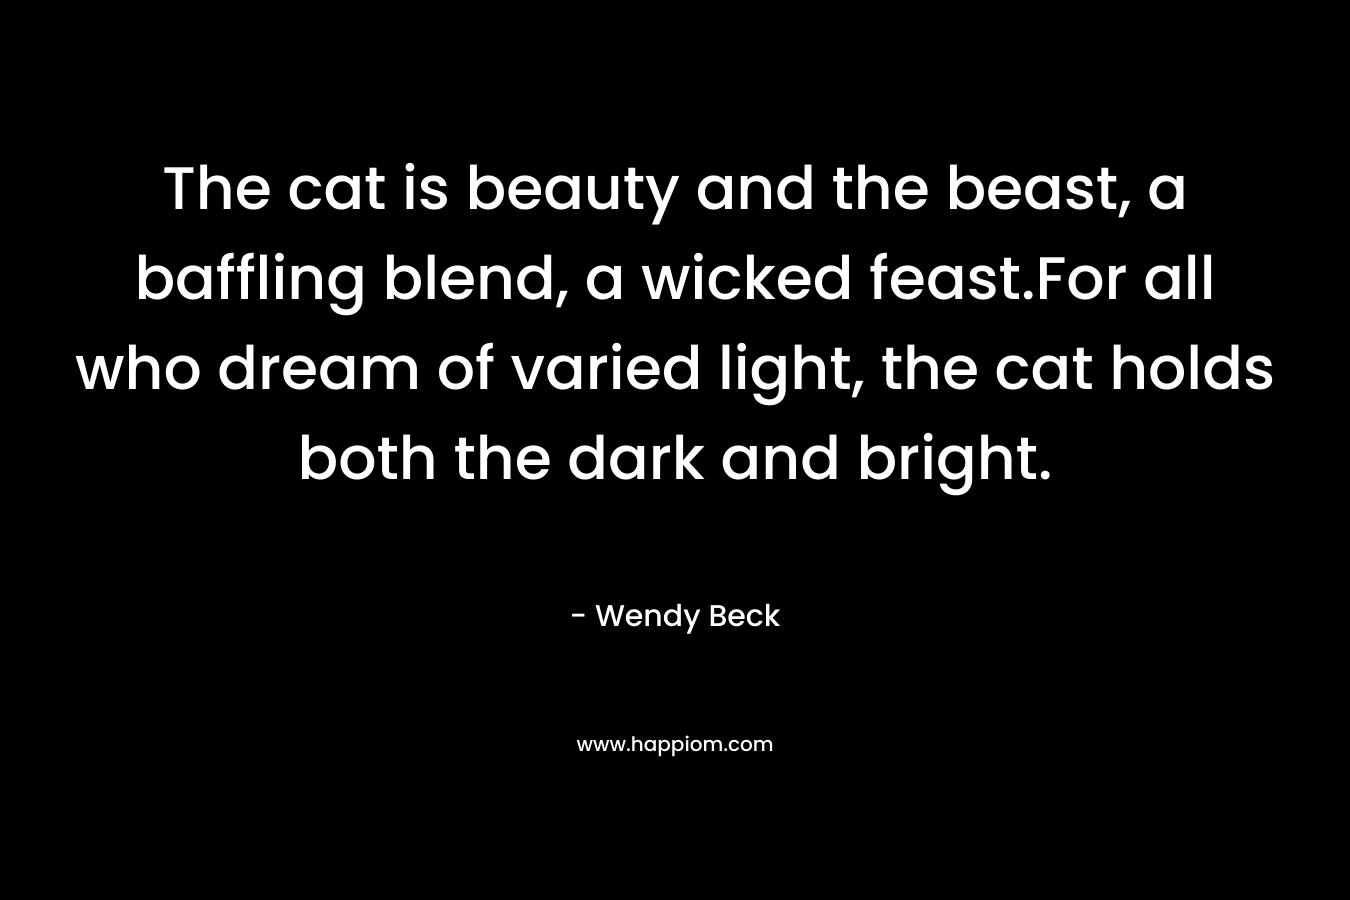 The cat is beauty and the beast, a baffling blend, a wicked feast.For all who dream of varied light, the cat holds both the dark and bright. – Wendy Beck